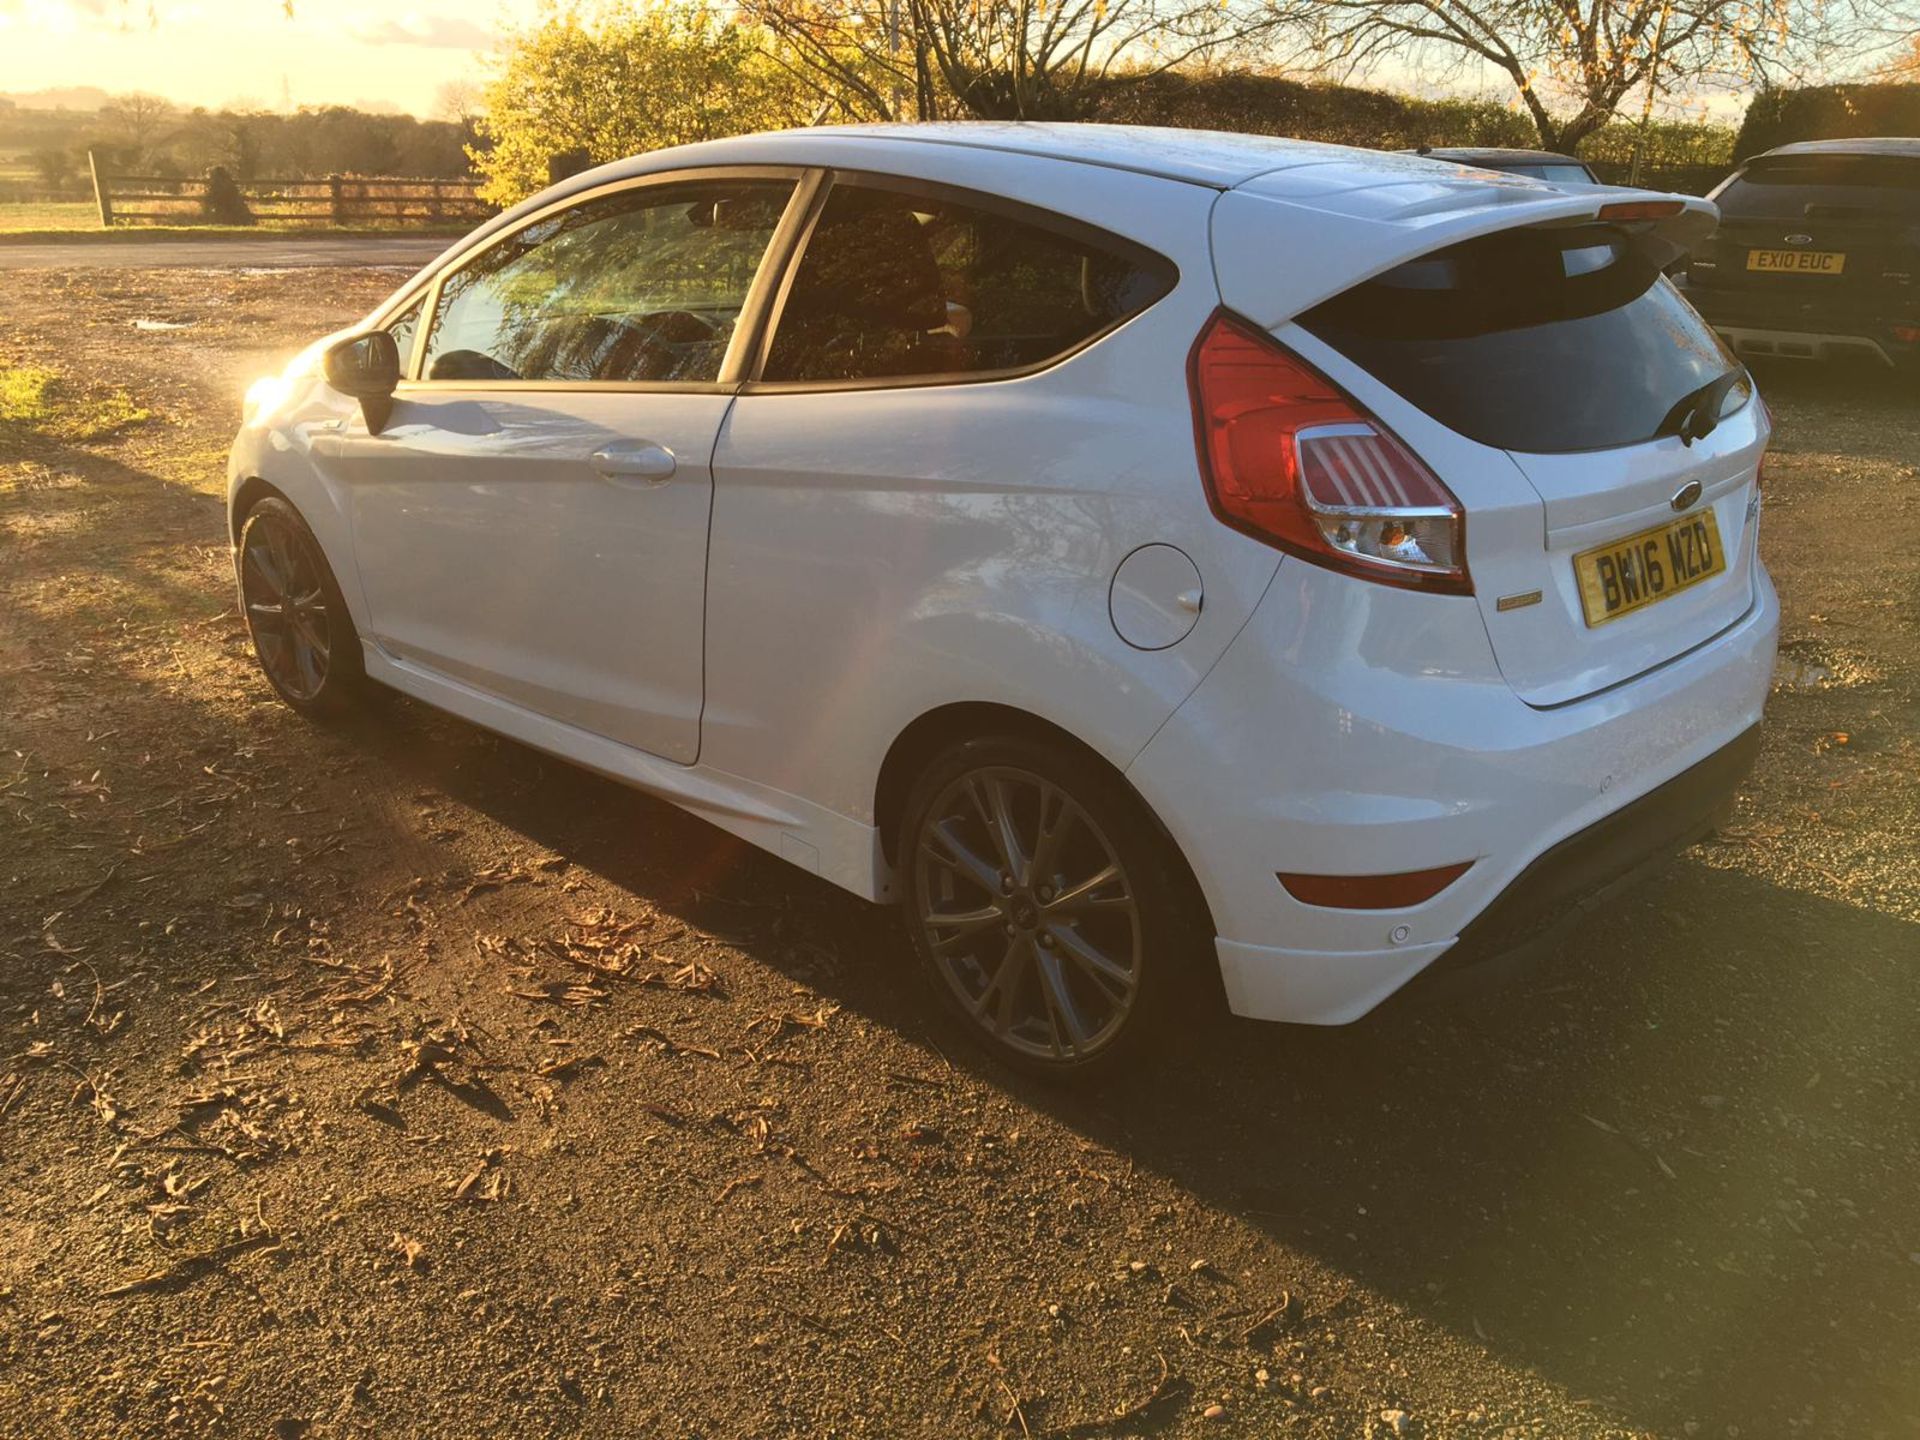 9K MILES! 2016 FORD FIESTA ST-LINE 1.0L ECOBOOST 140 PETROL WHITE 3 DR, SHOWING 0 FORMER KEEPERS - Image 4 of 9